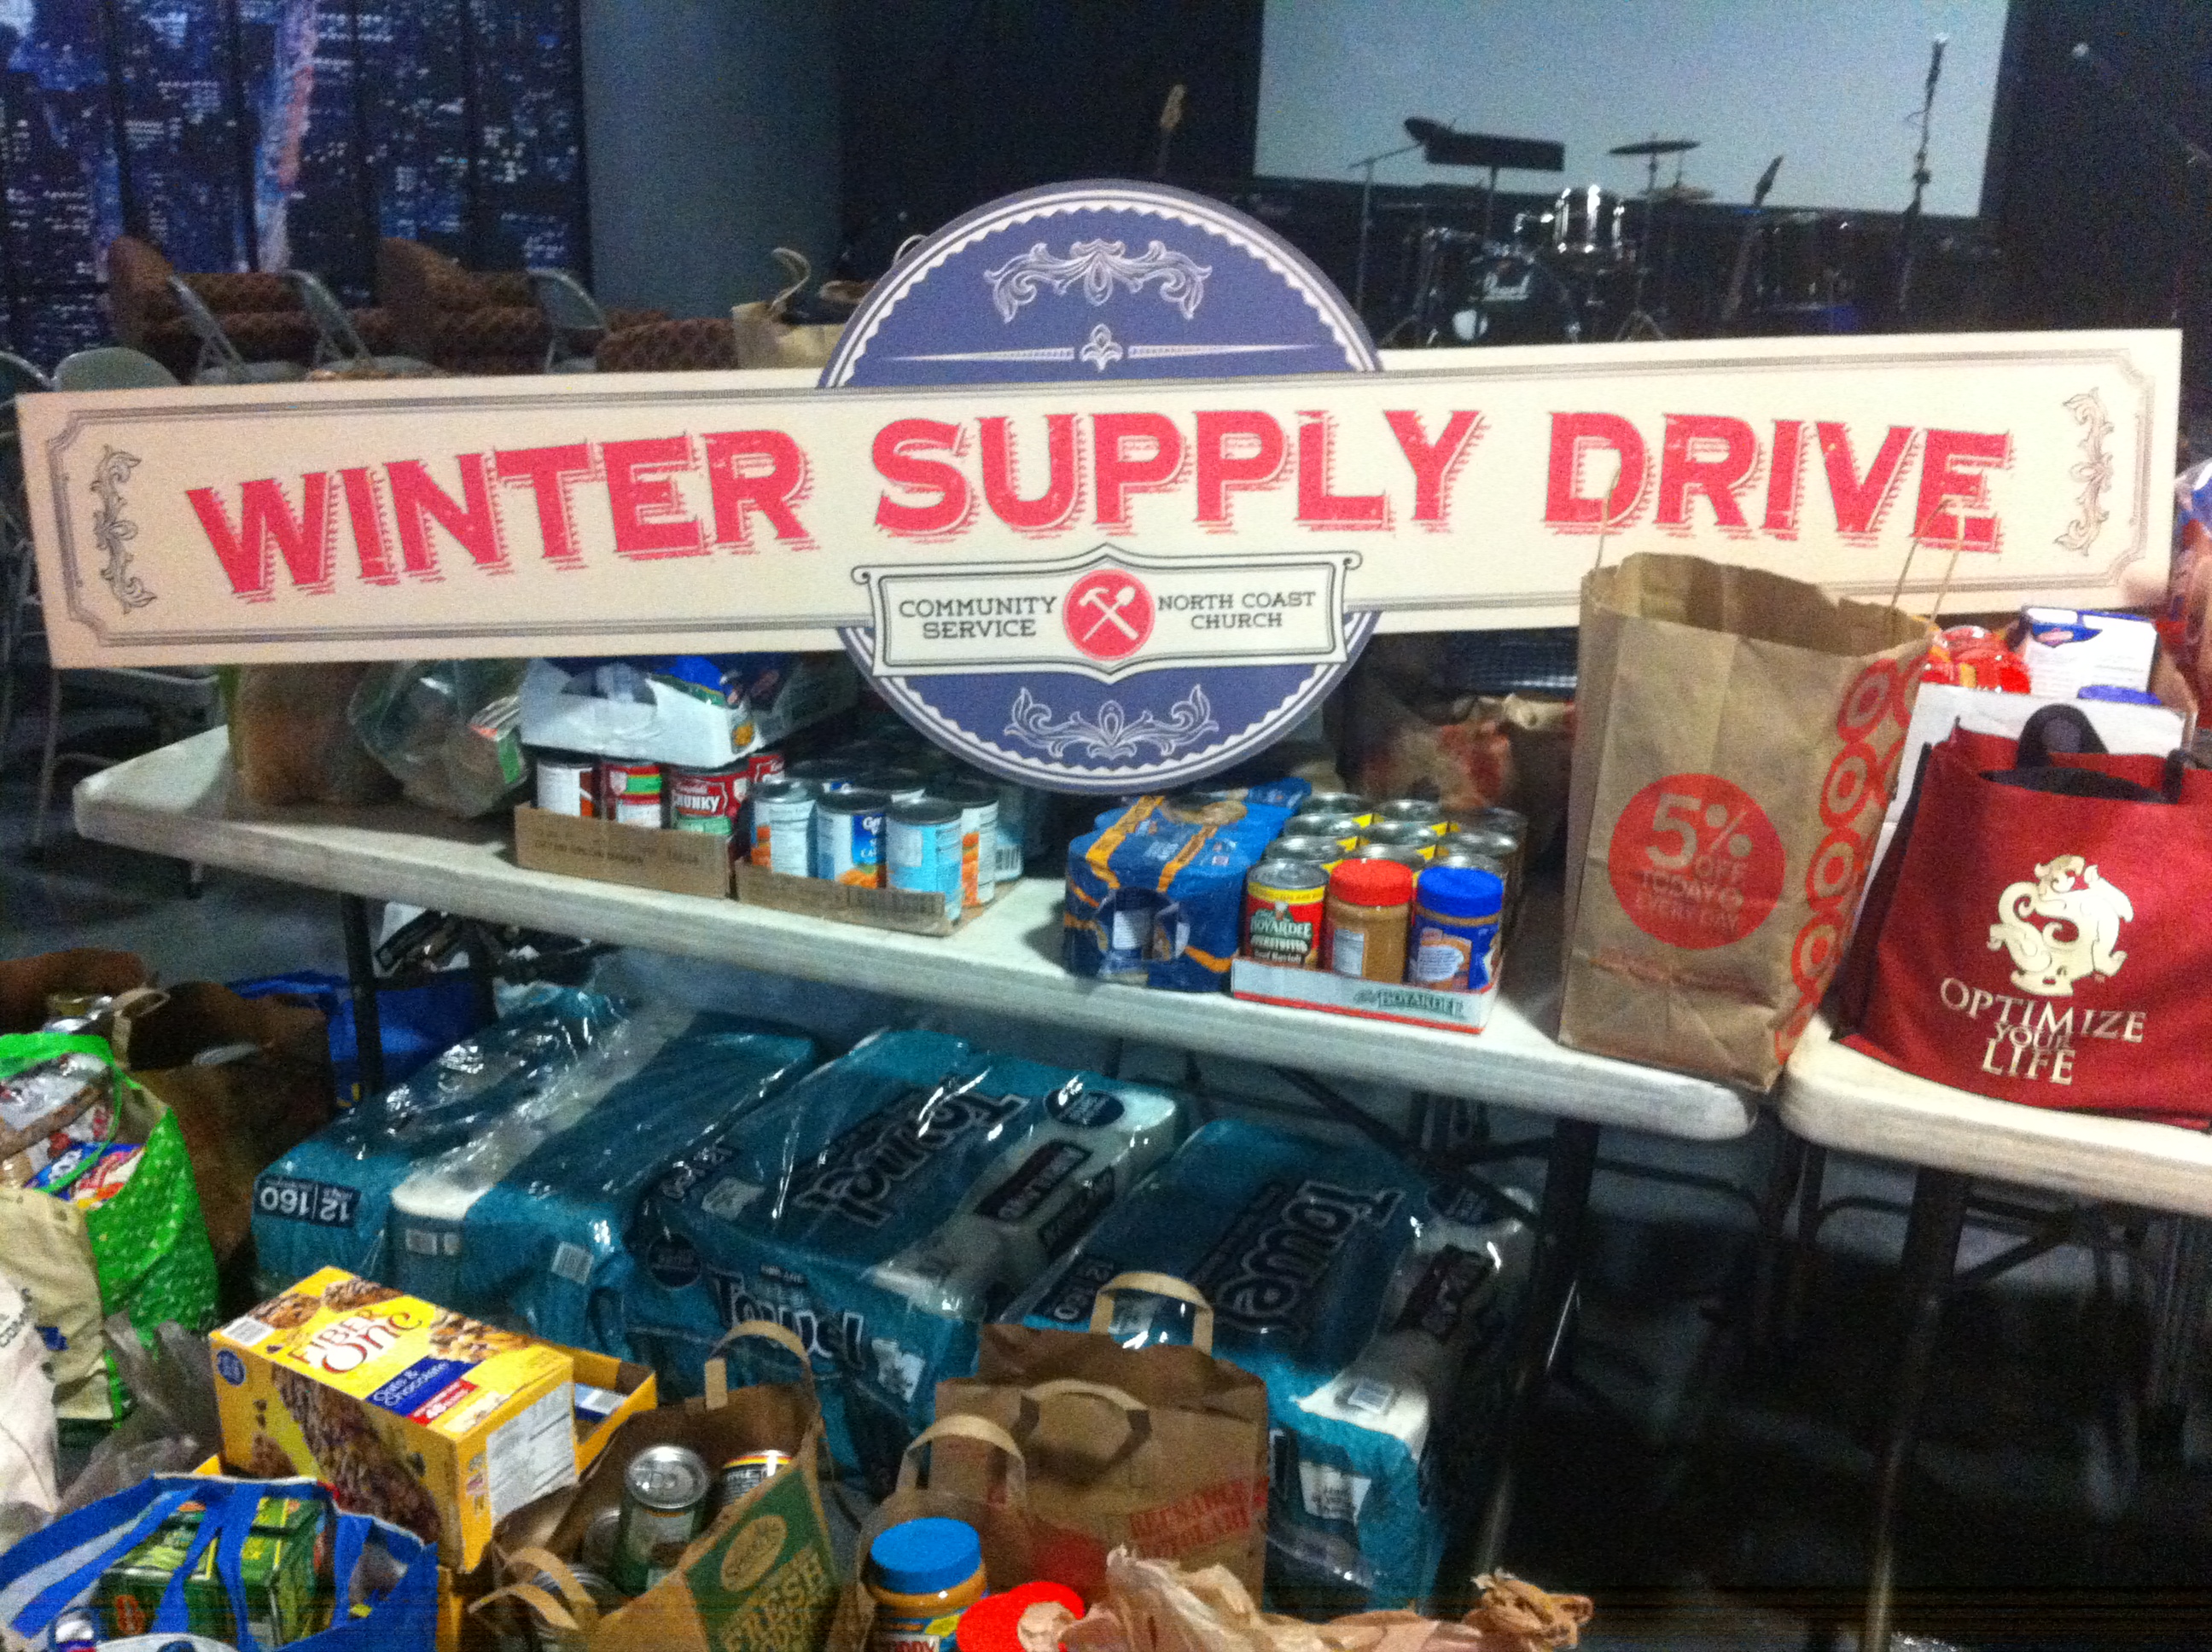 Winter Supply Drive - Sorting Day - Monday